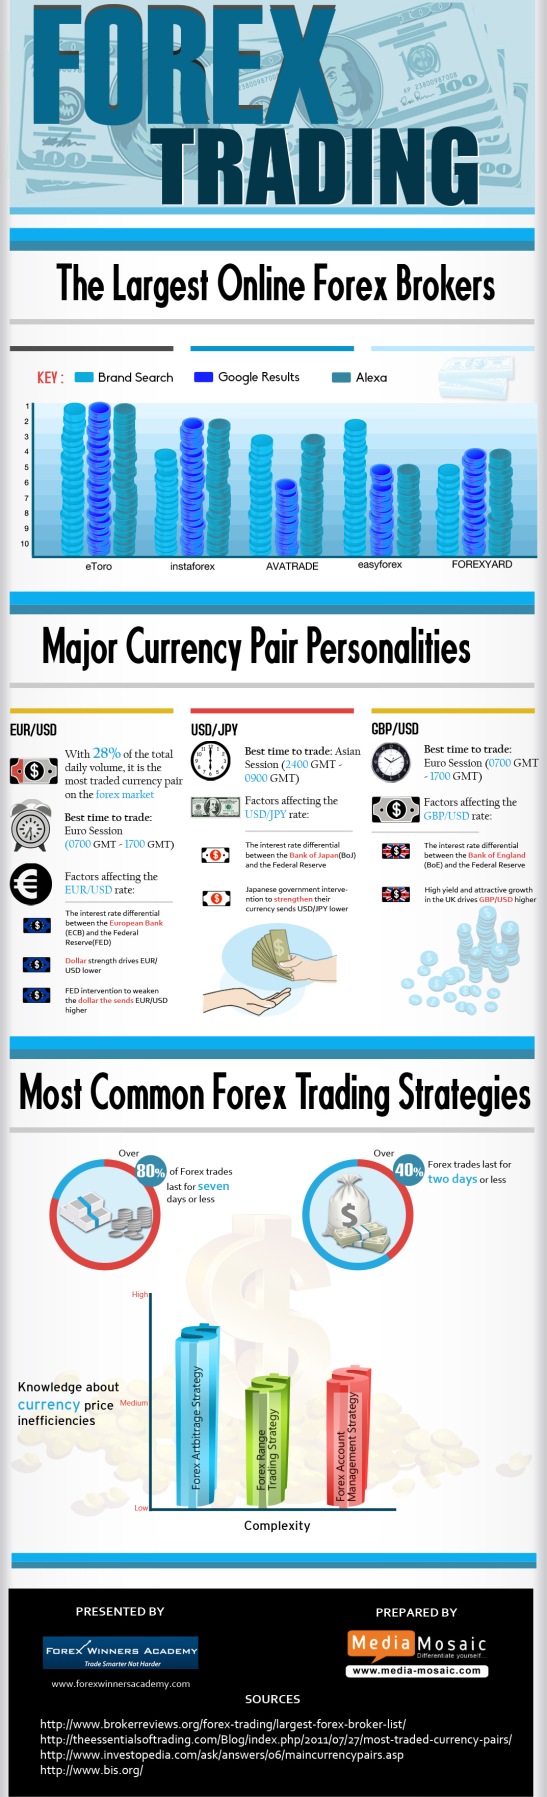 Forex Trading – The Largest Online Forex Brokers